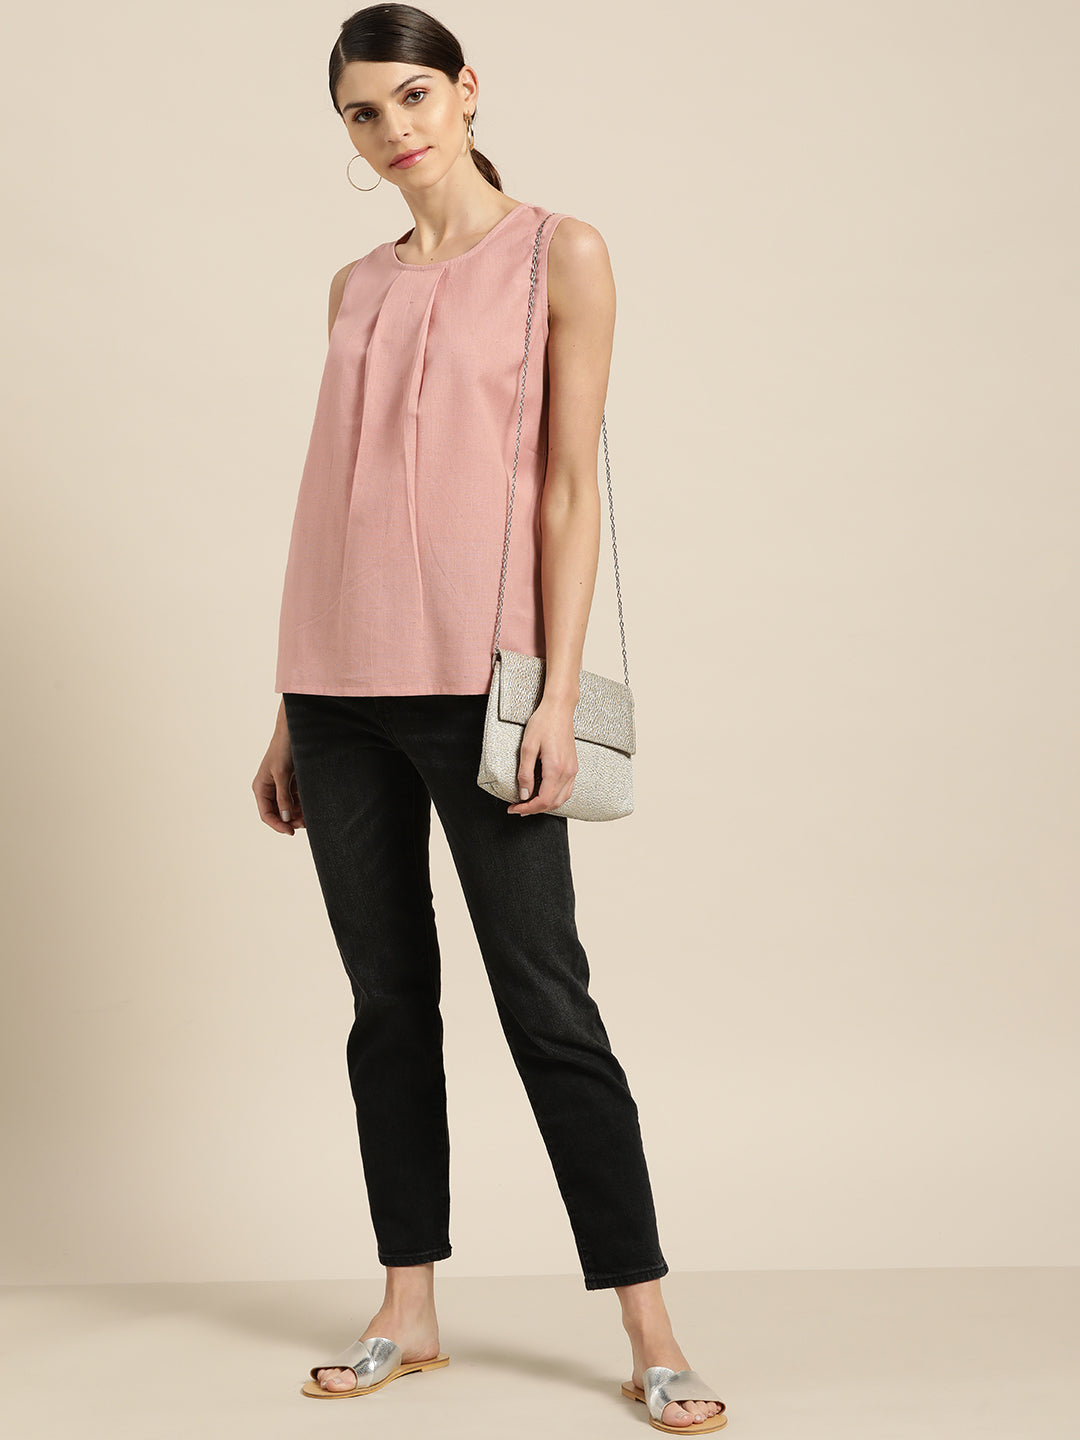 Women Baked Pink Sleeveless Back Tie Up Top